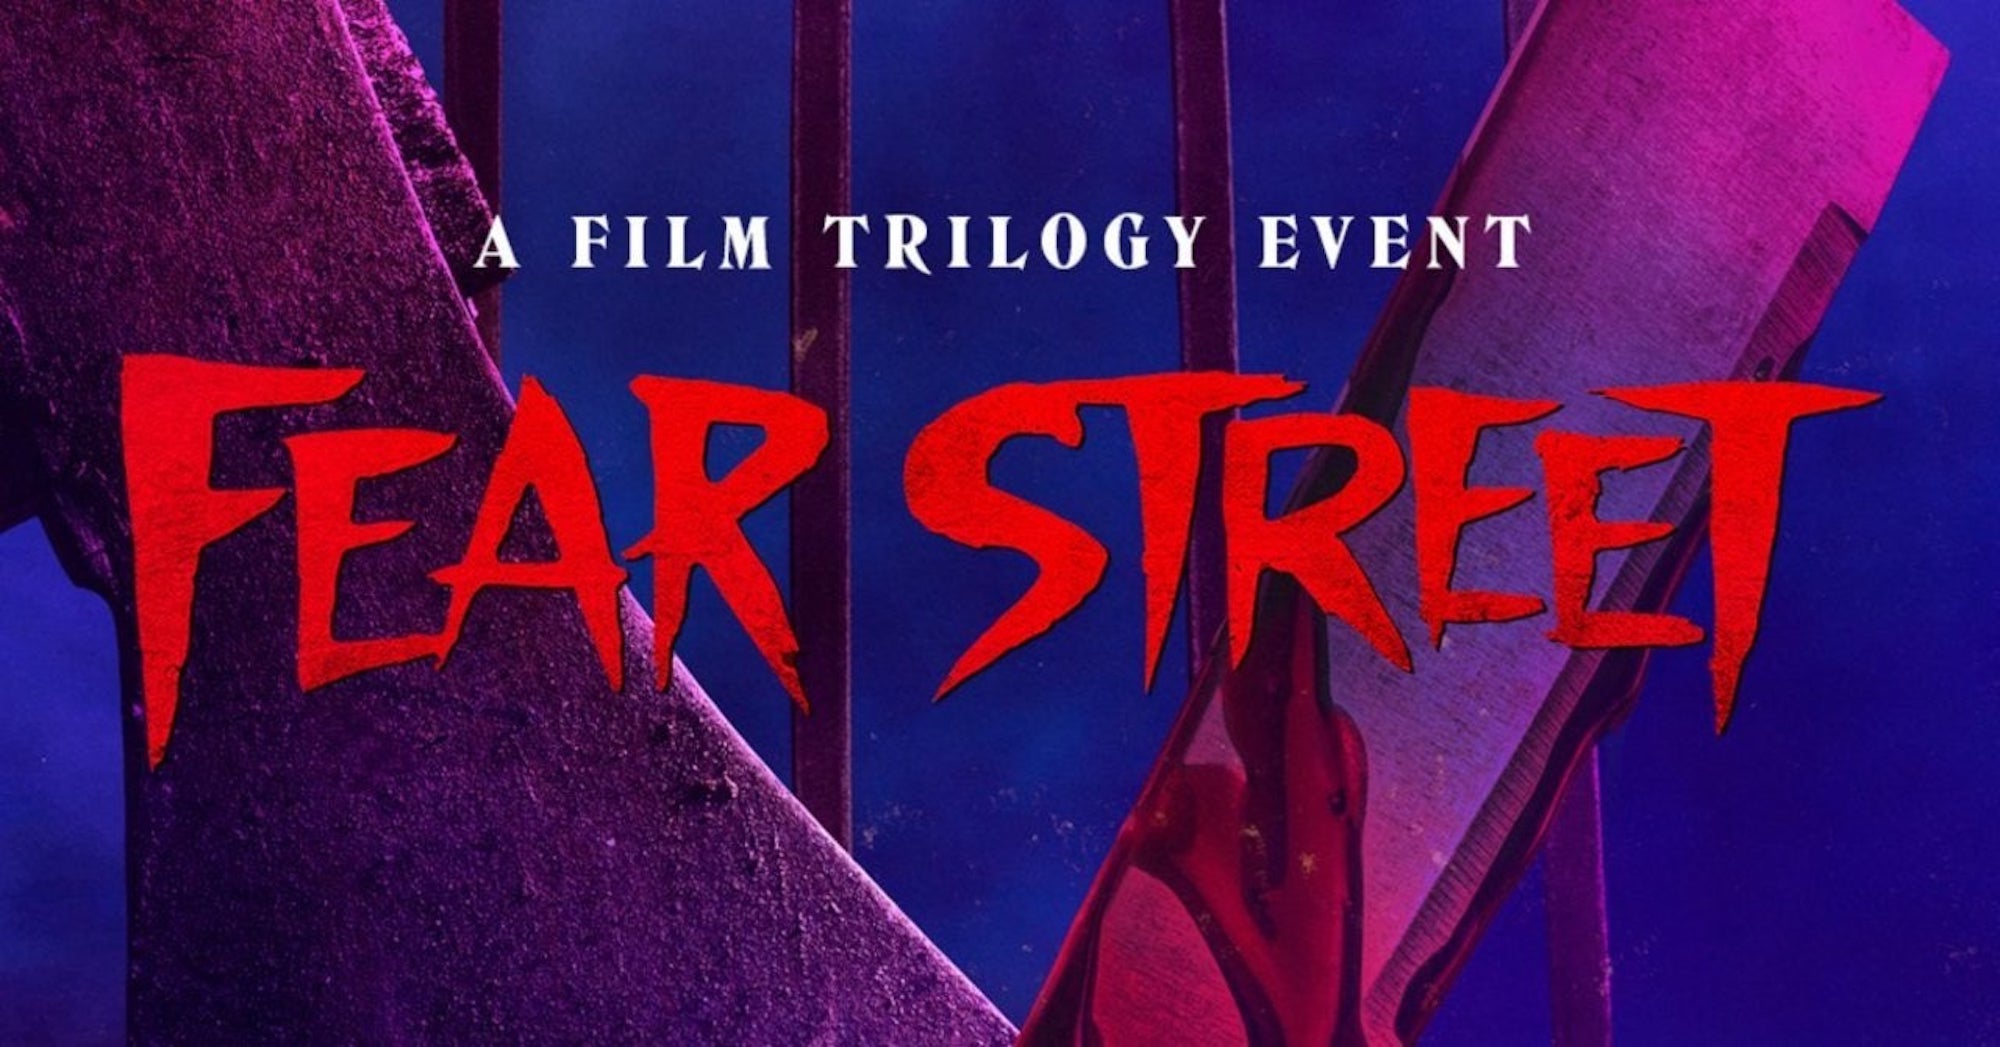 Did the 'Fear Street' trilogy one of the top Netflix horror